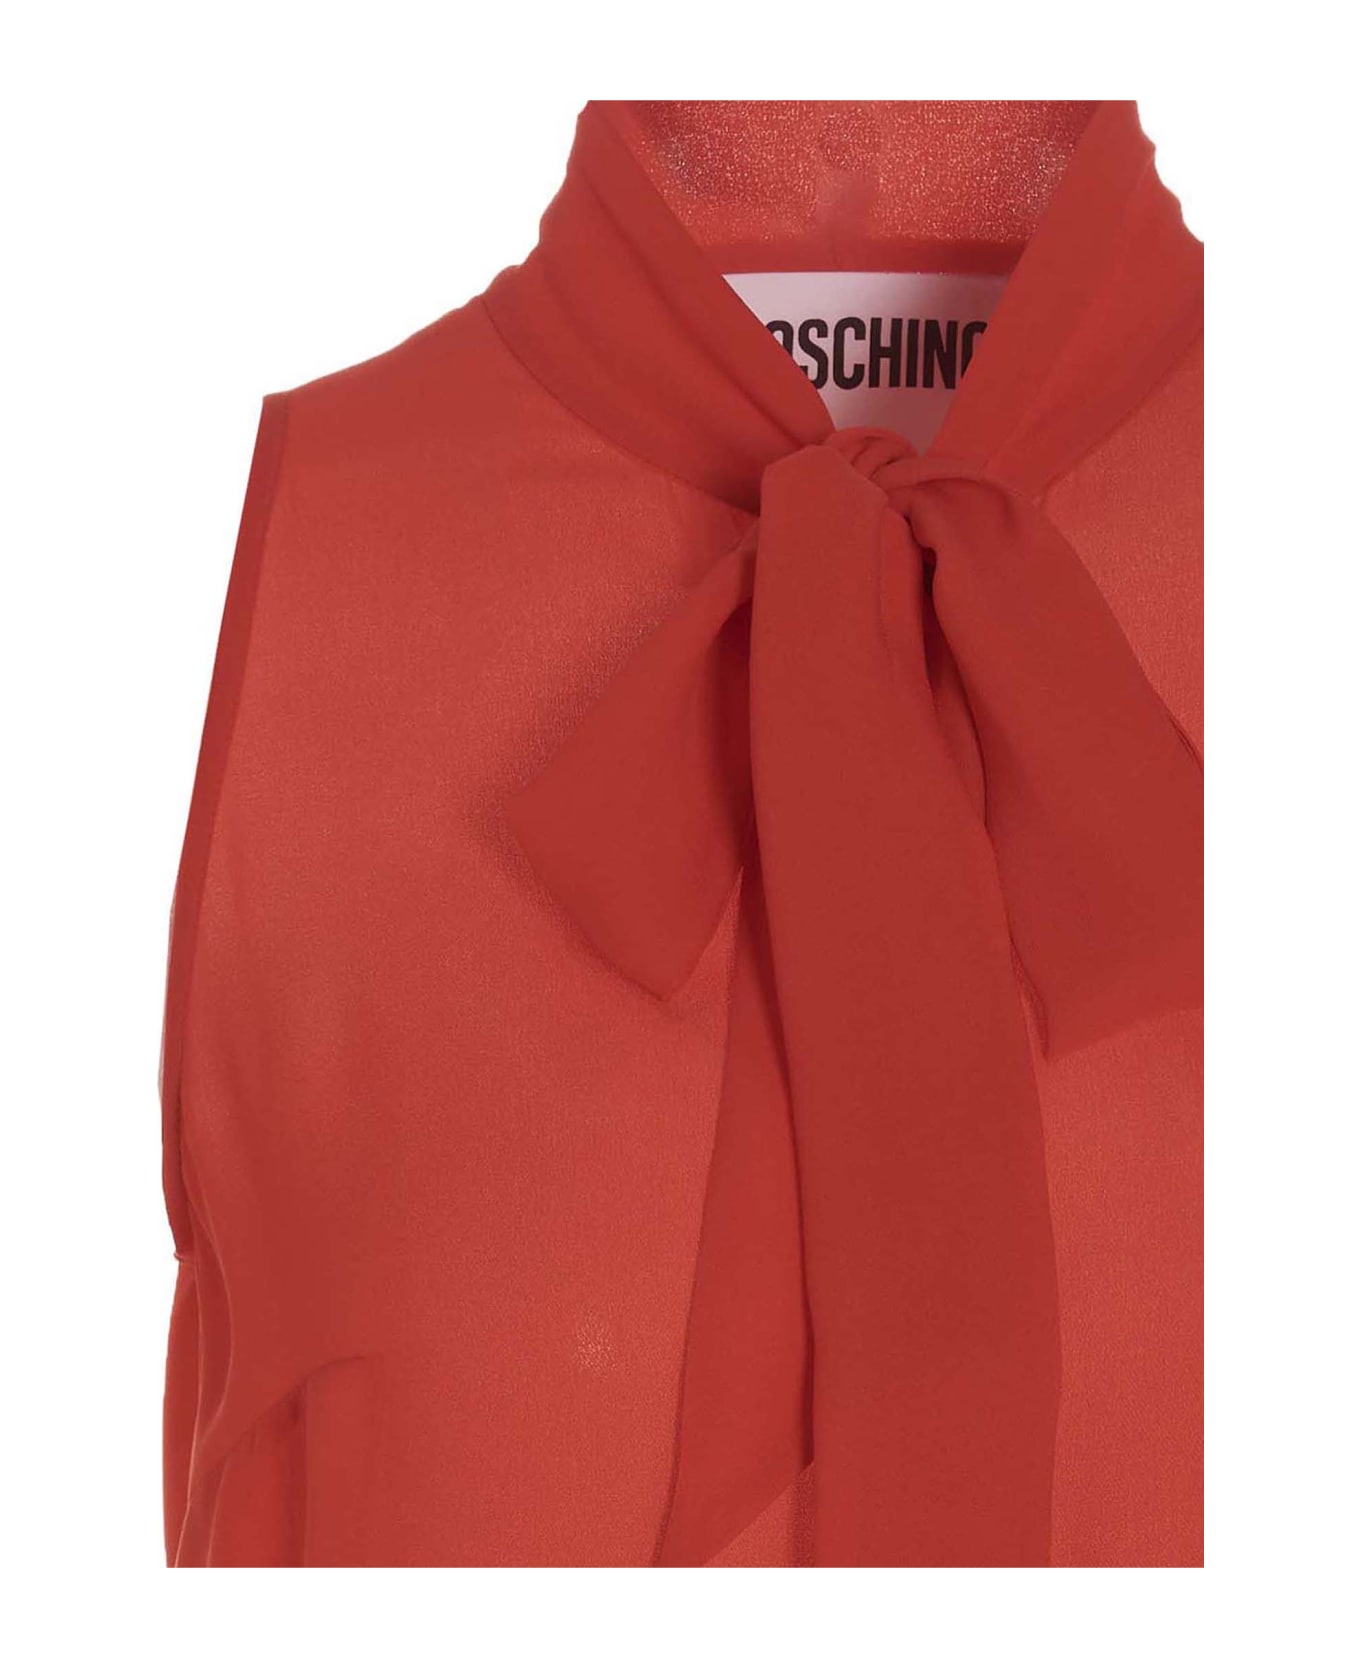 Moschino Pussy Bow Blouse - Red ブラウス